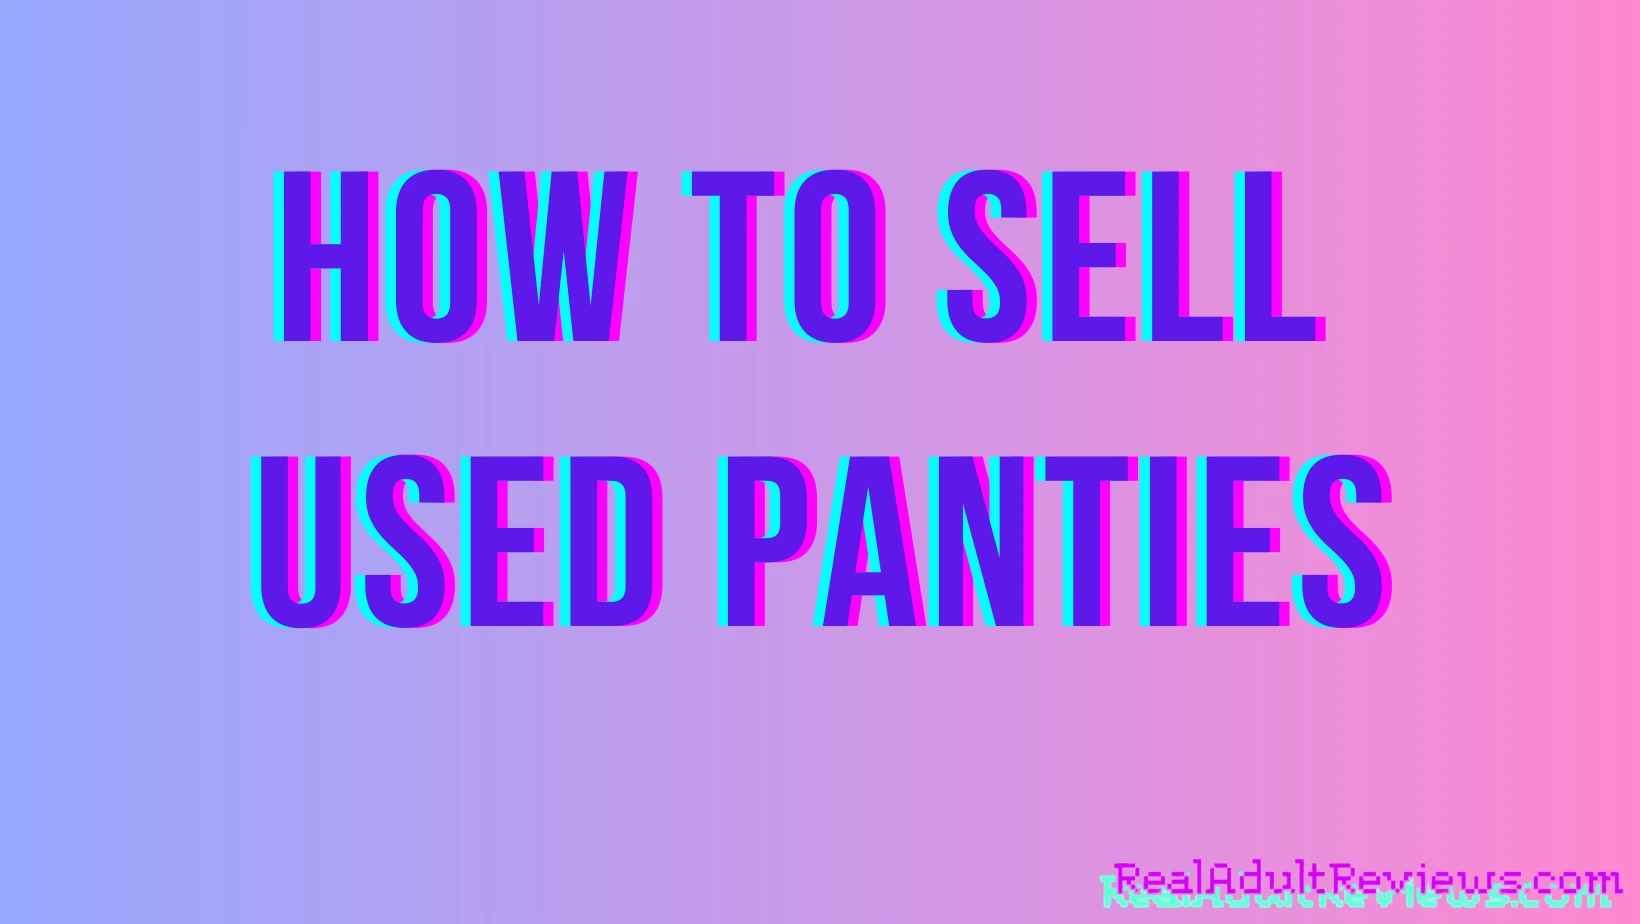 How to sell [or buy] used panties online? Best sites paying for socks & underwear